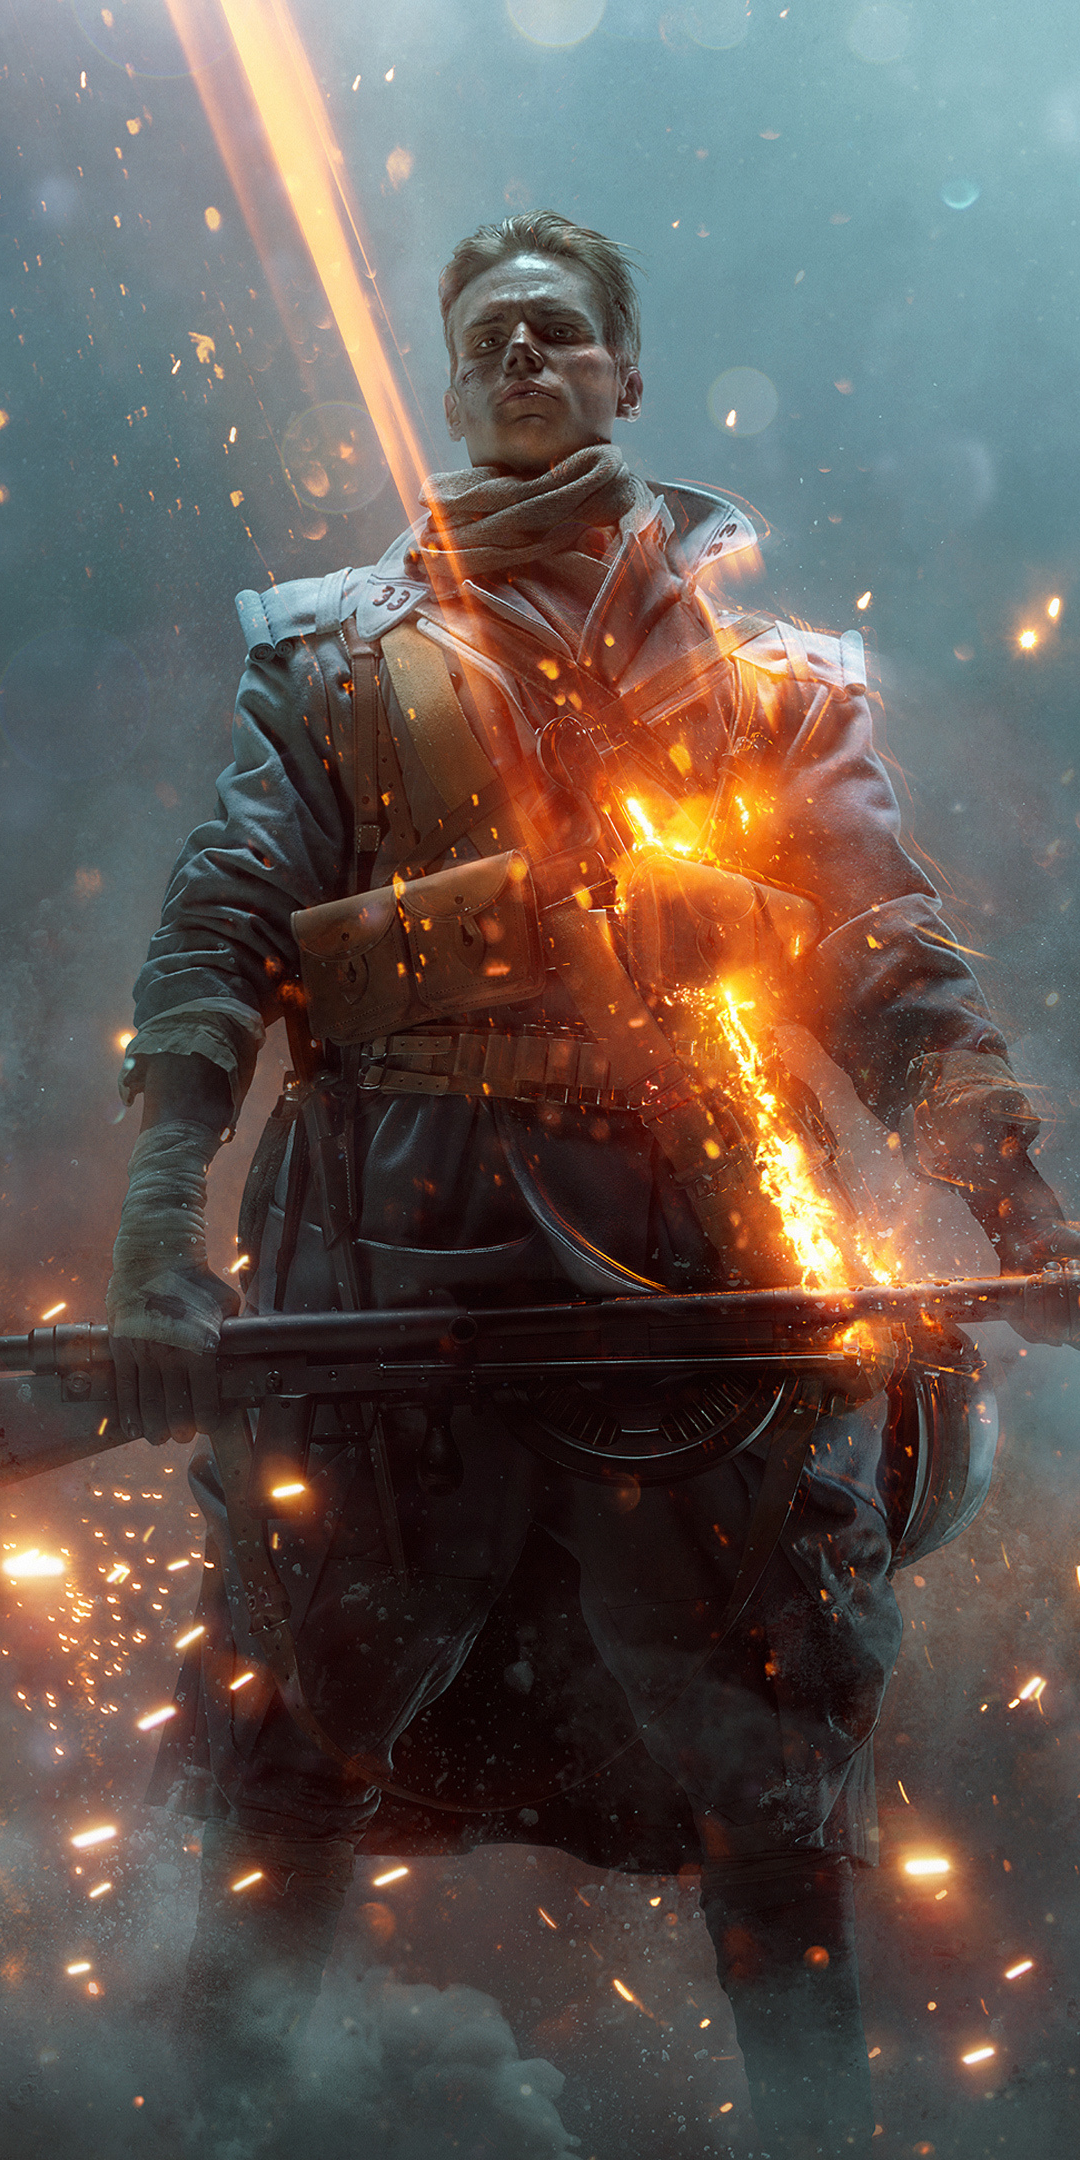 Battlefield 1, They Shall Not Pass, soldier, video game, 2017, 1080x2160 wallpaper